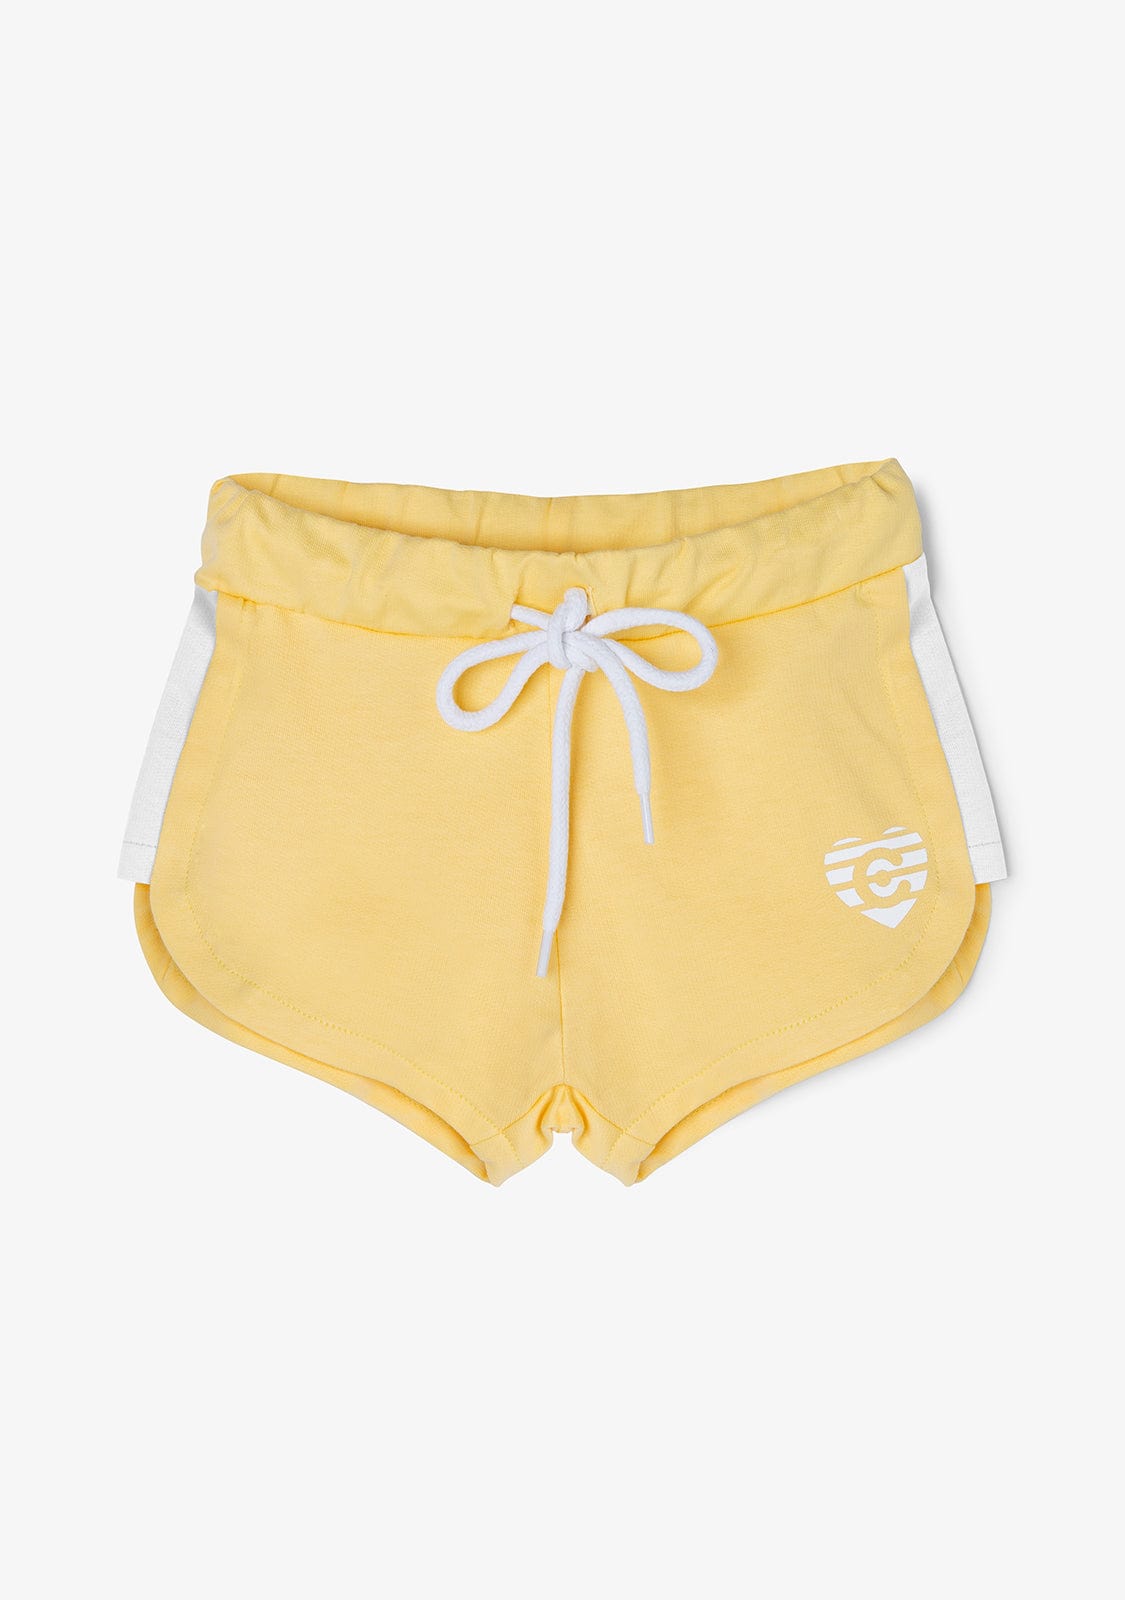 CONGUITOS TEXTIL Clothing Girl's Yellow Heart Plain Athletic Shorts